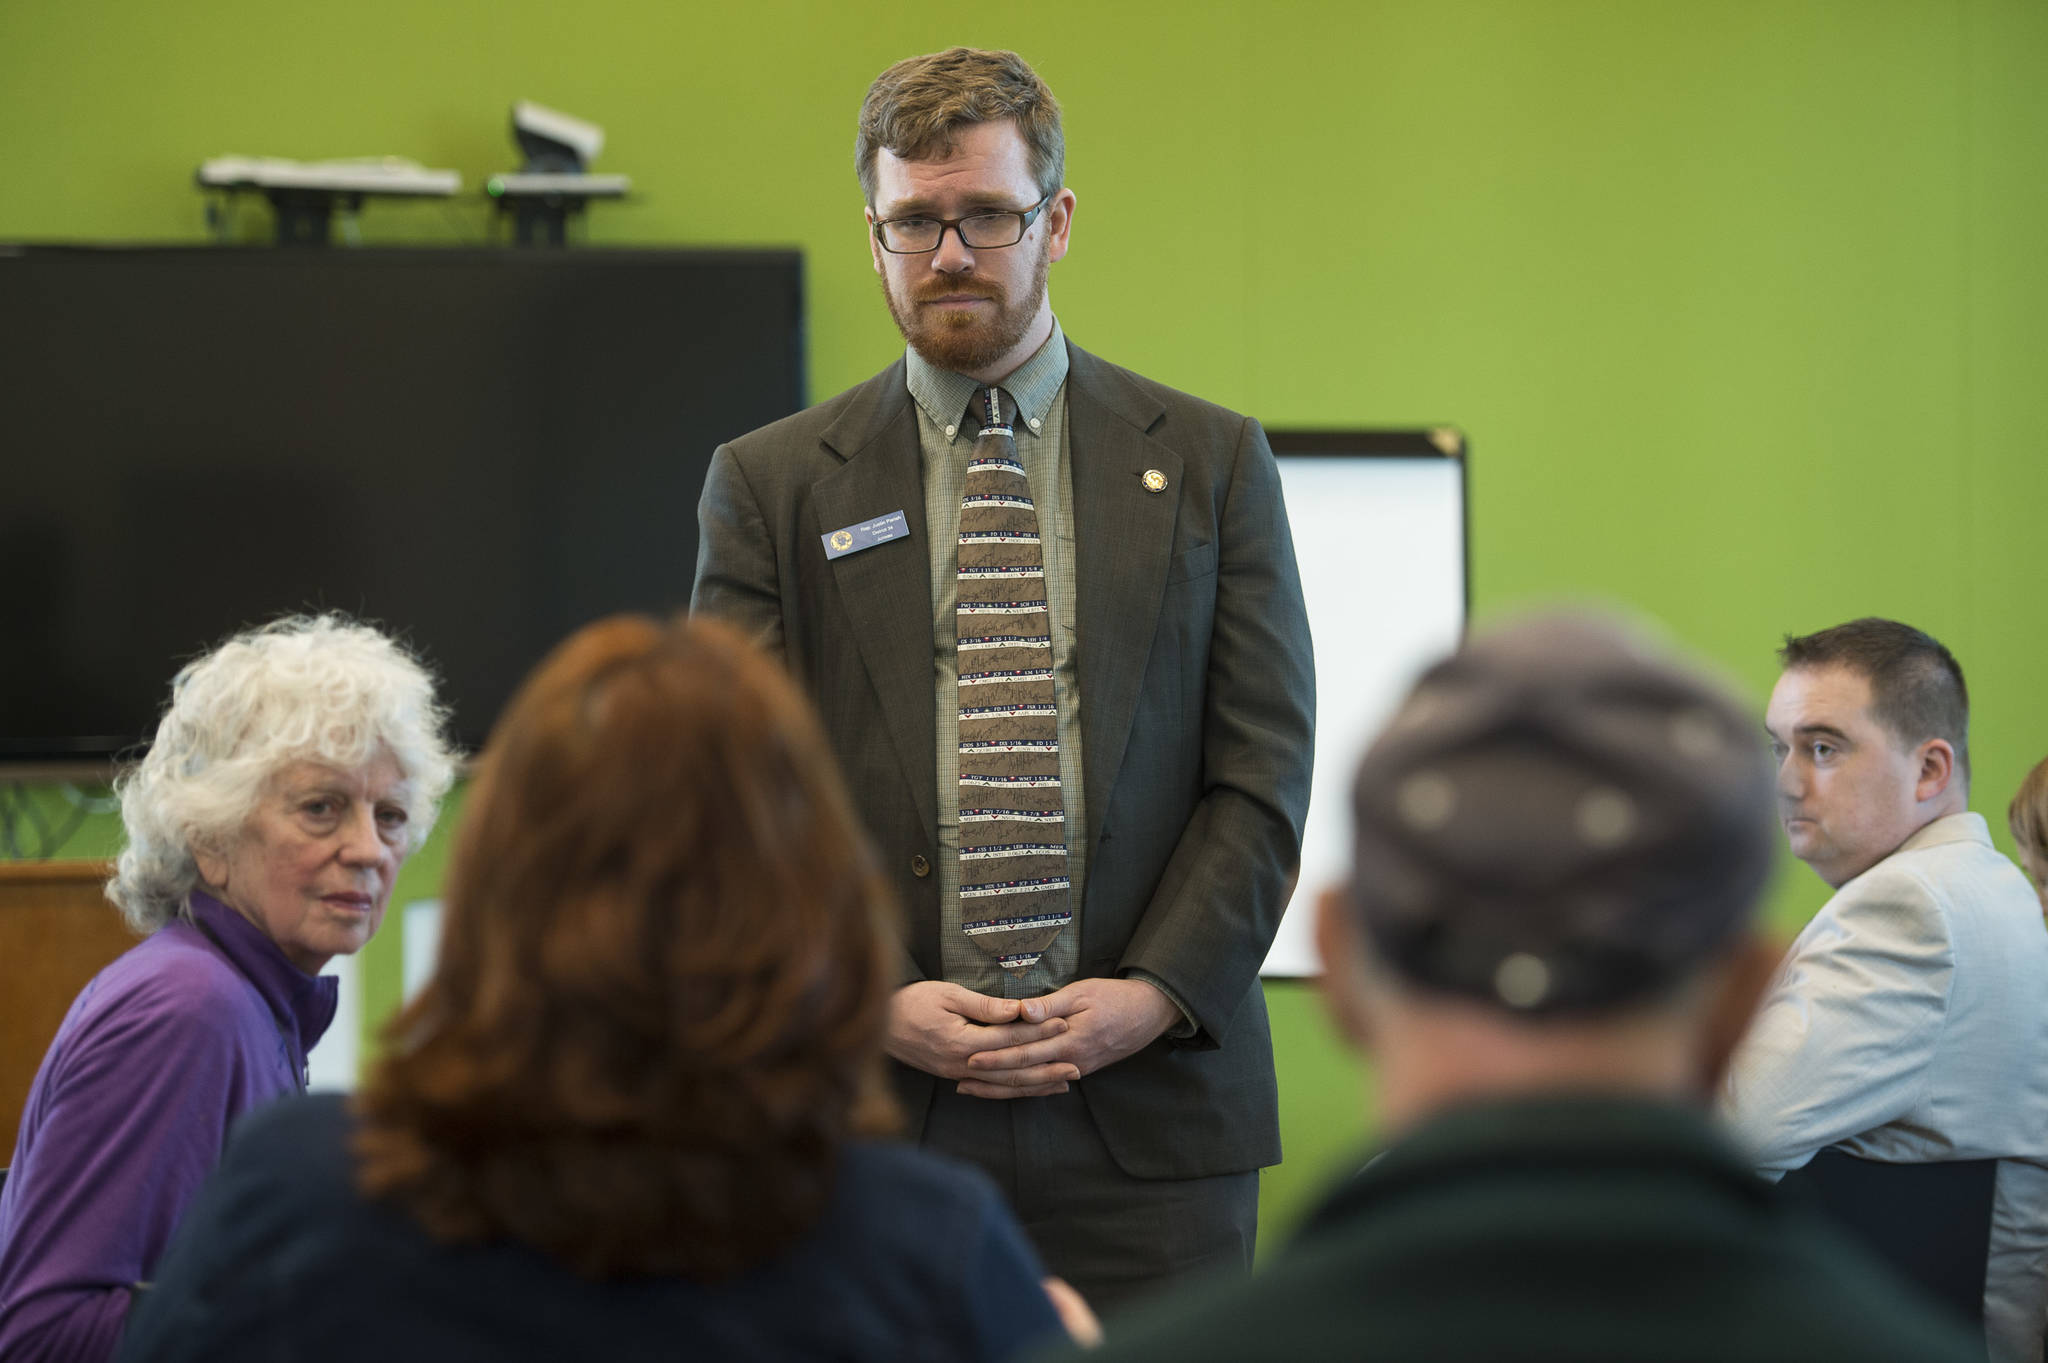 Rep. Justin Parish, D-Juneau, holds a town hall meeting at the Mendenhall Valley Public Library on Tuesday, May 9, 2017. (Michael Penn | Juneau Empire)